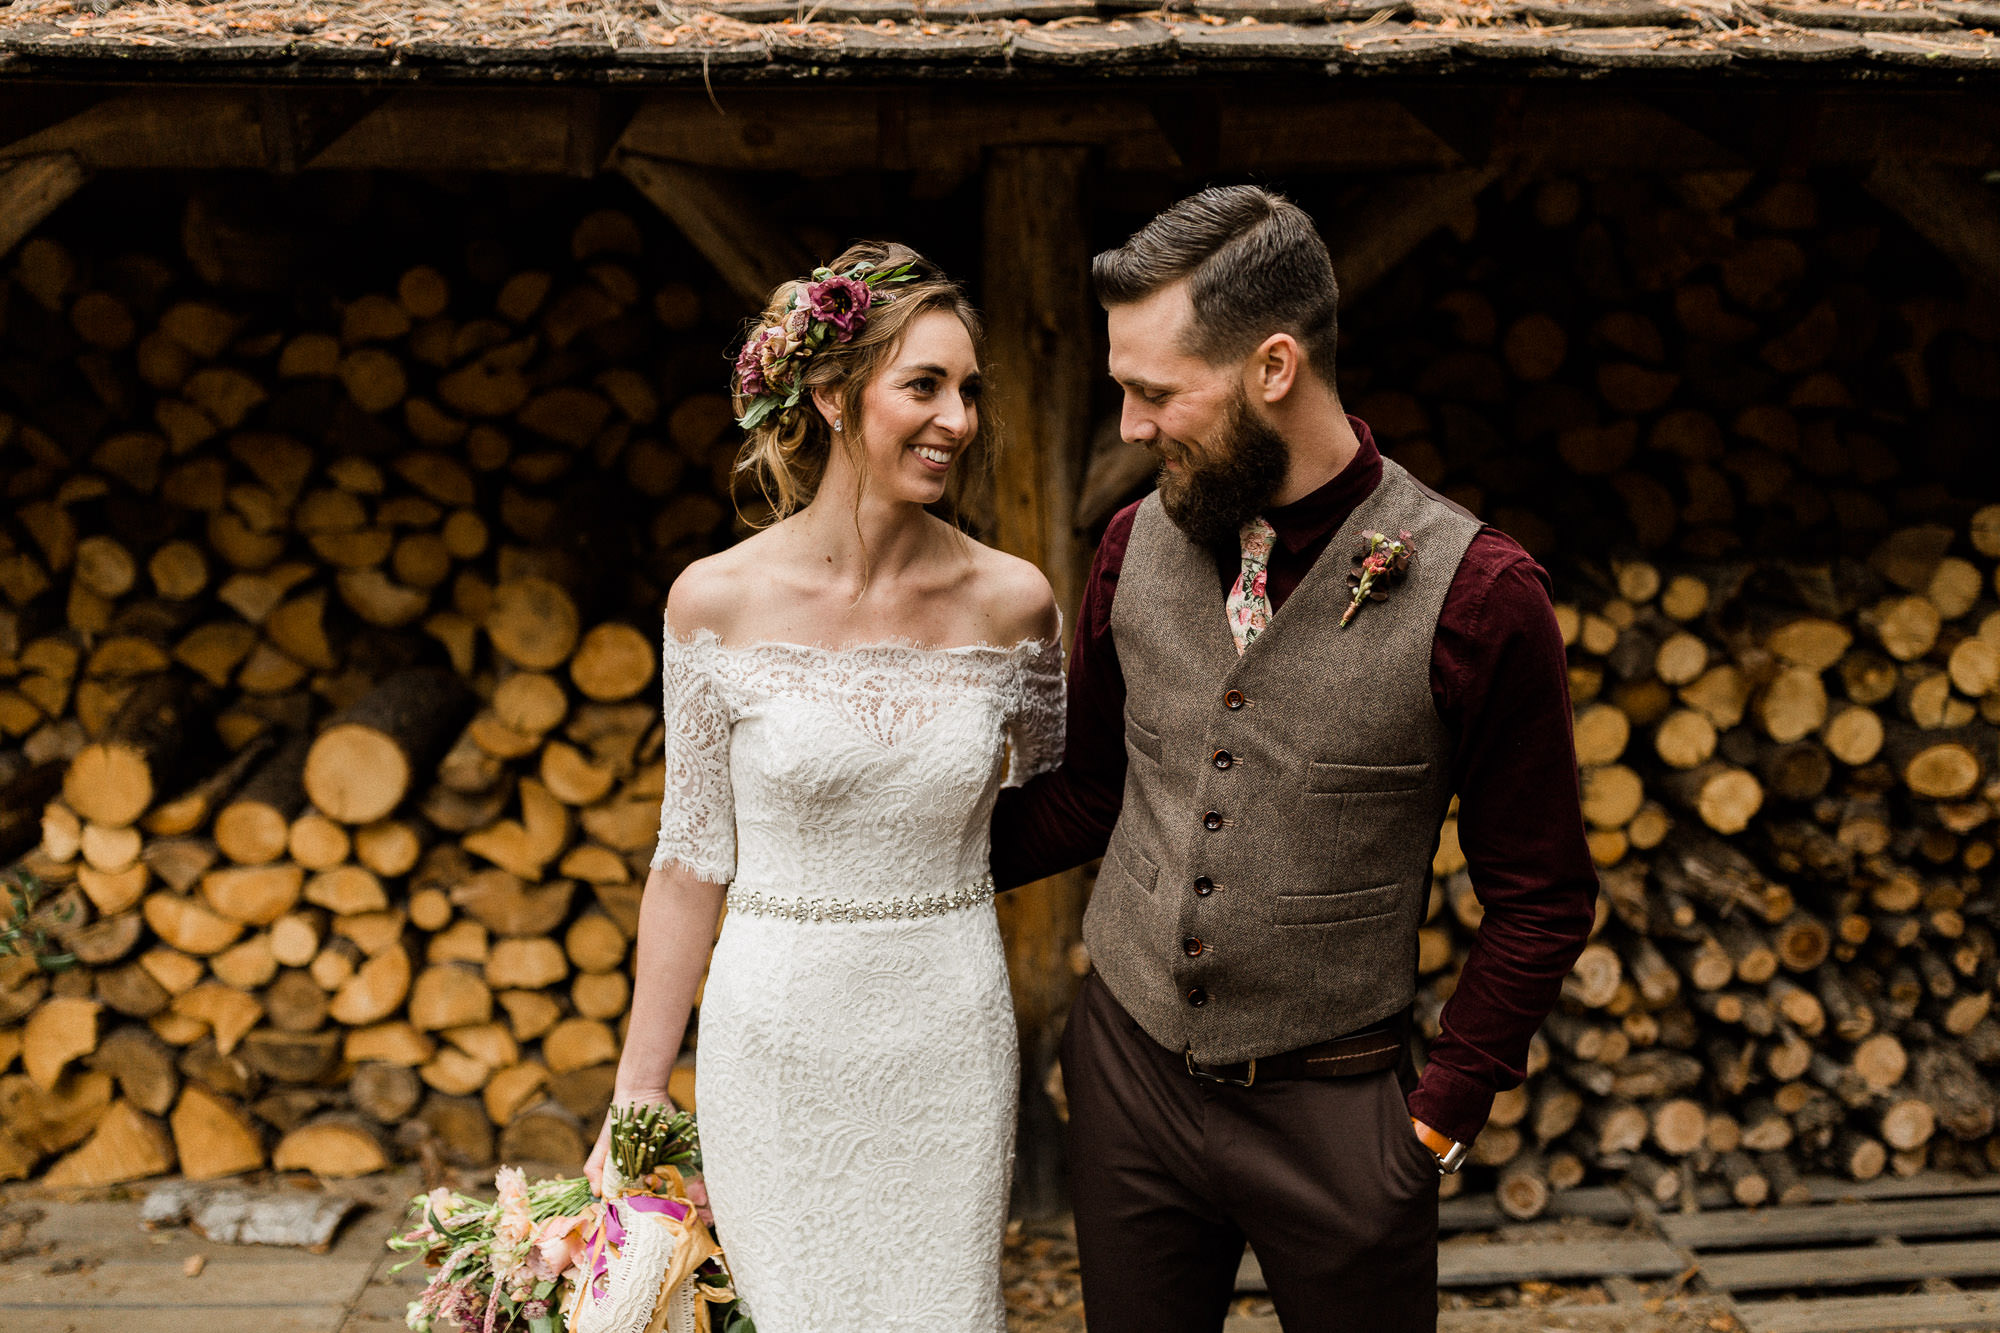 Bride and groom laugh in front of firewood stacks at Skyliner Lodge in Bend, Oregon